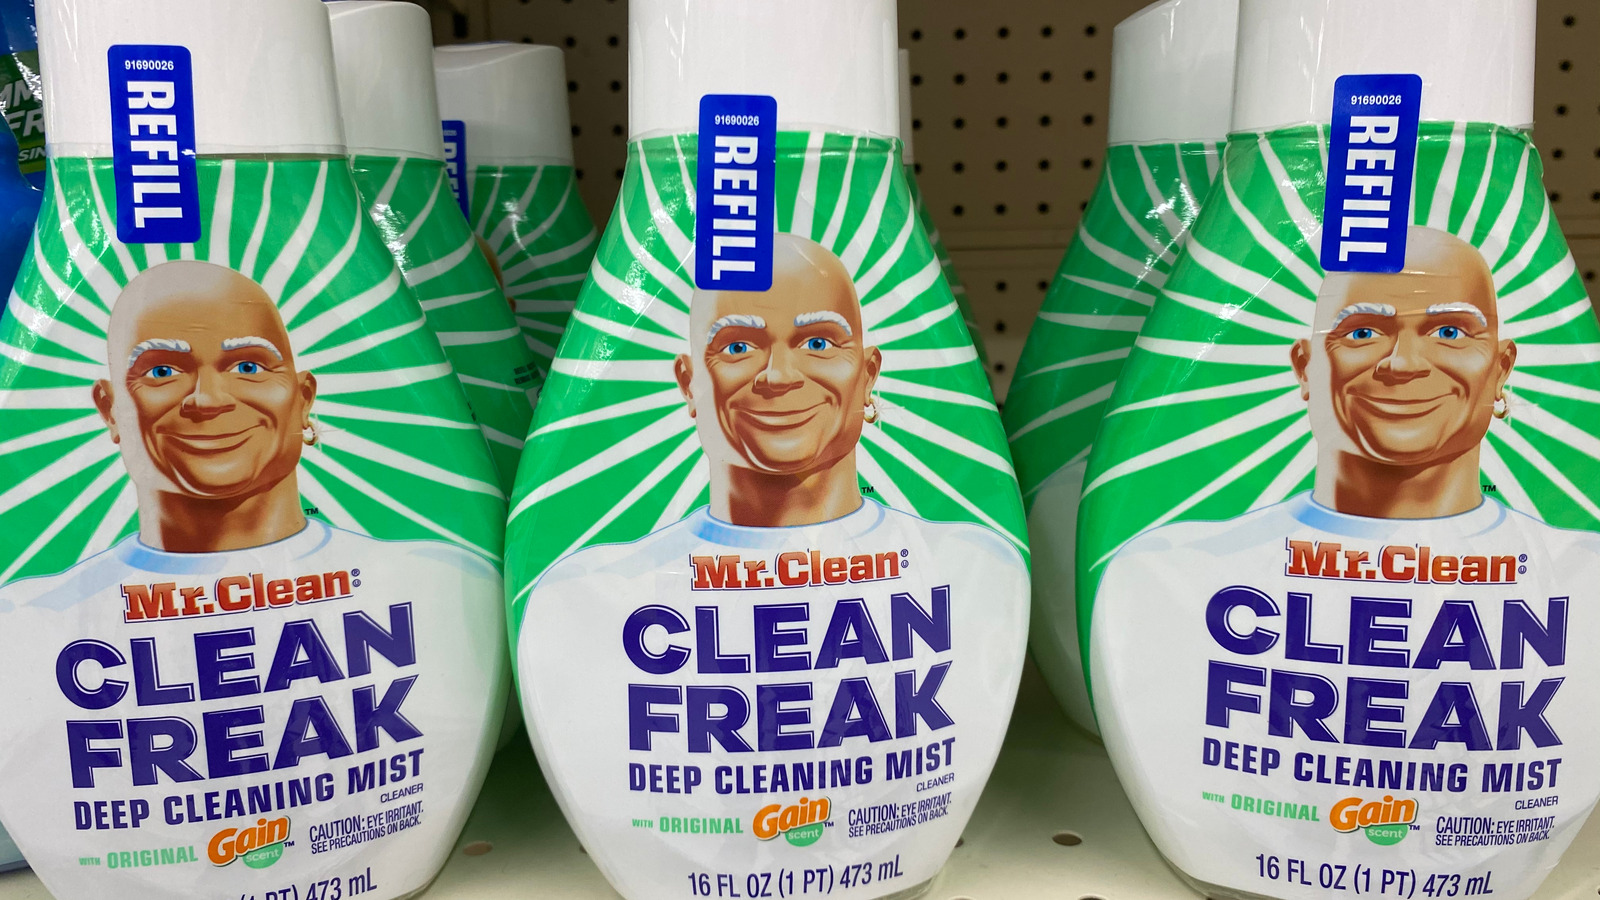 Why does mr clean have an earring